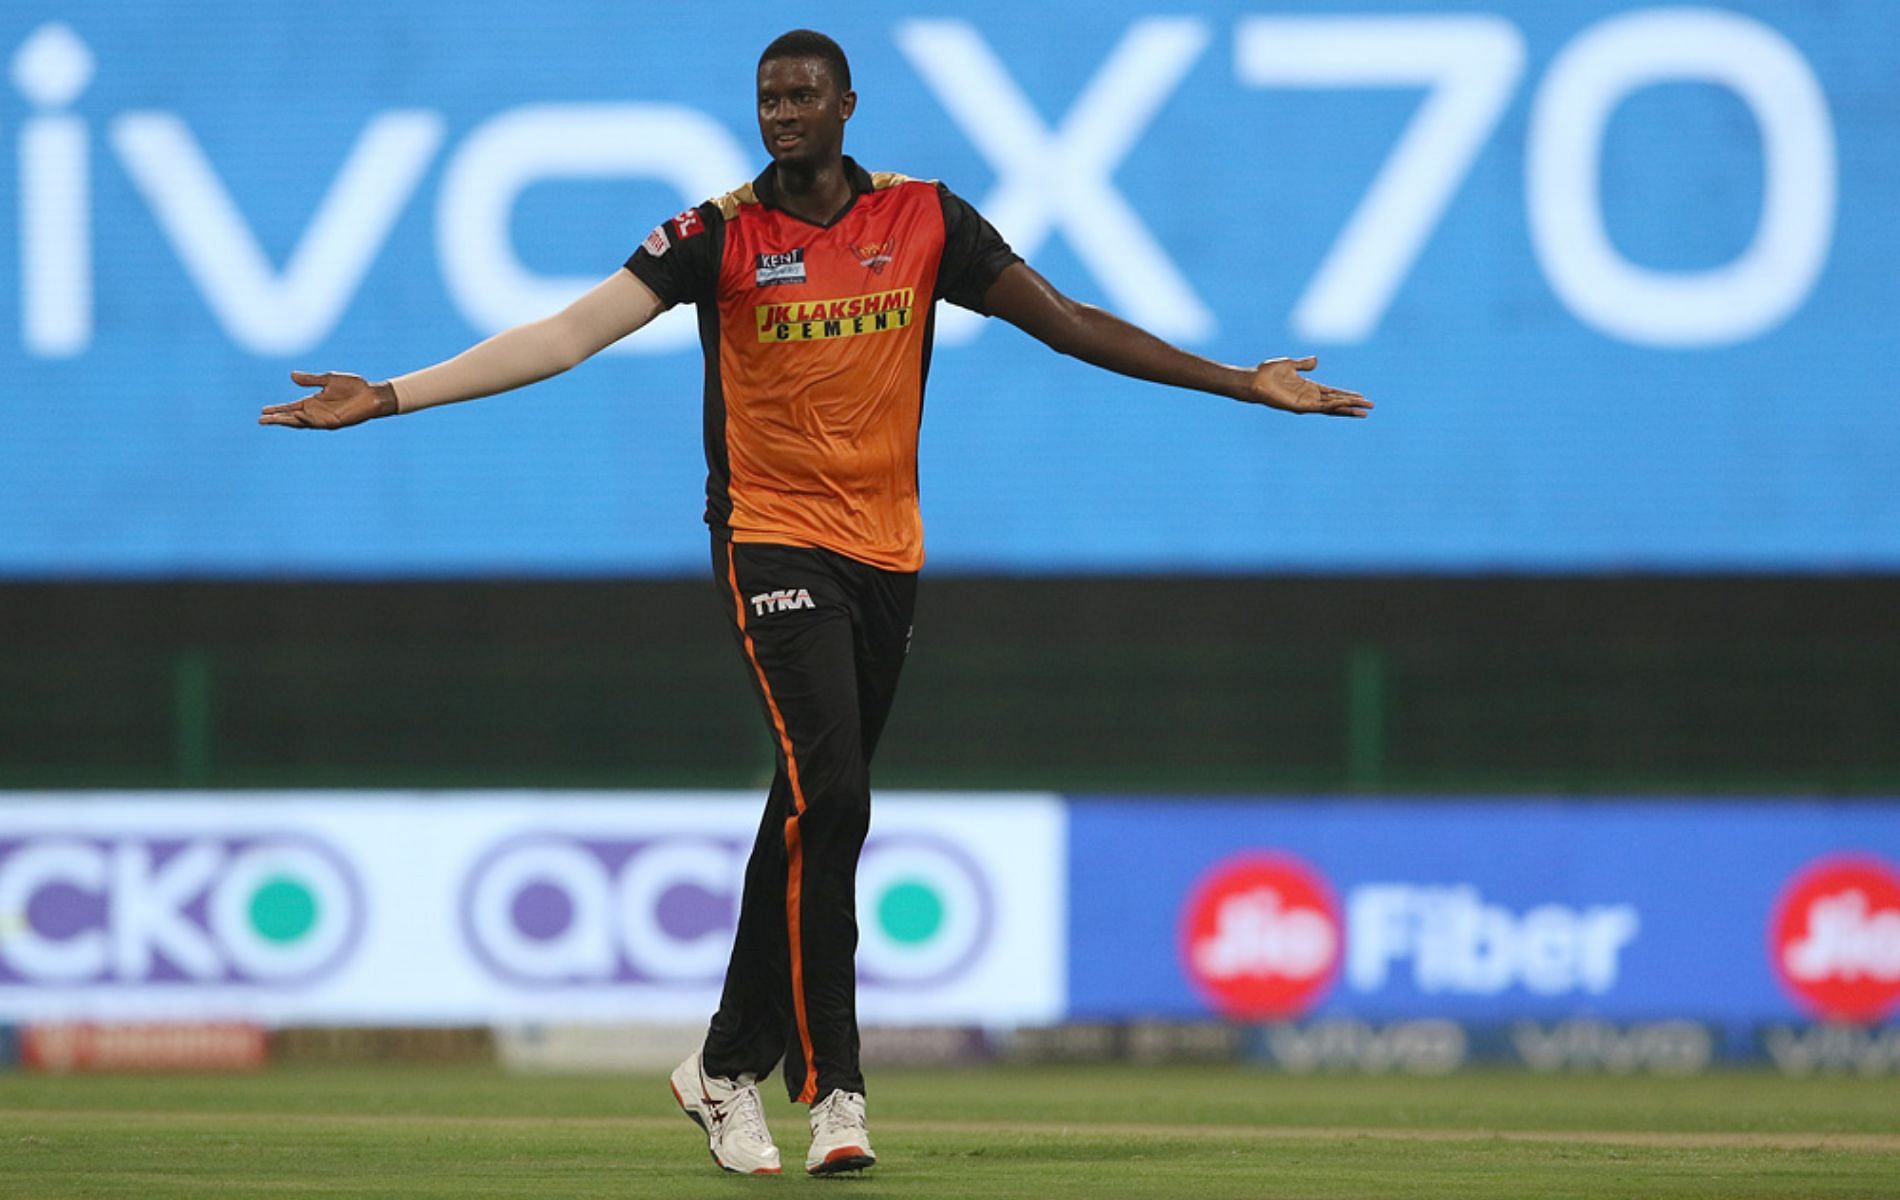 Jason Holder was released by SunRisers Hyderabad ahead of the IPL 2022 Mega Auction.